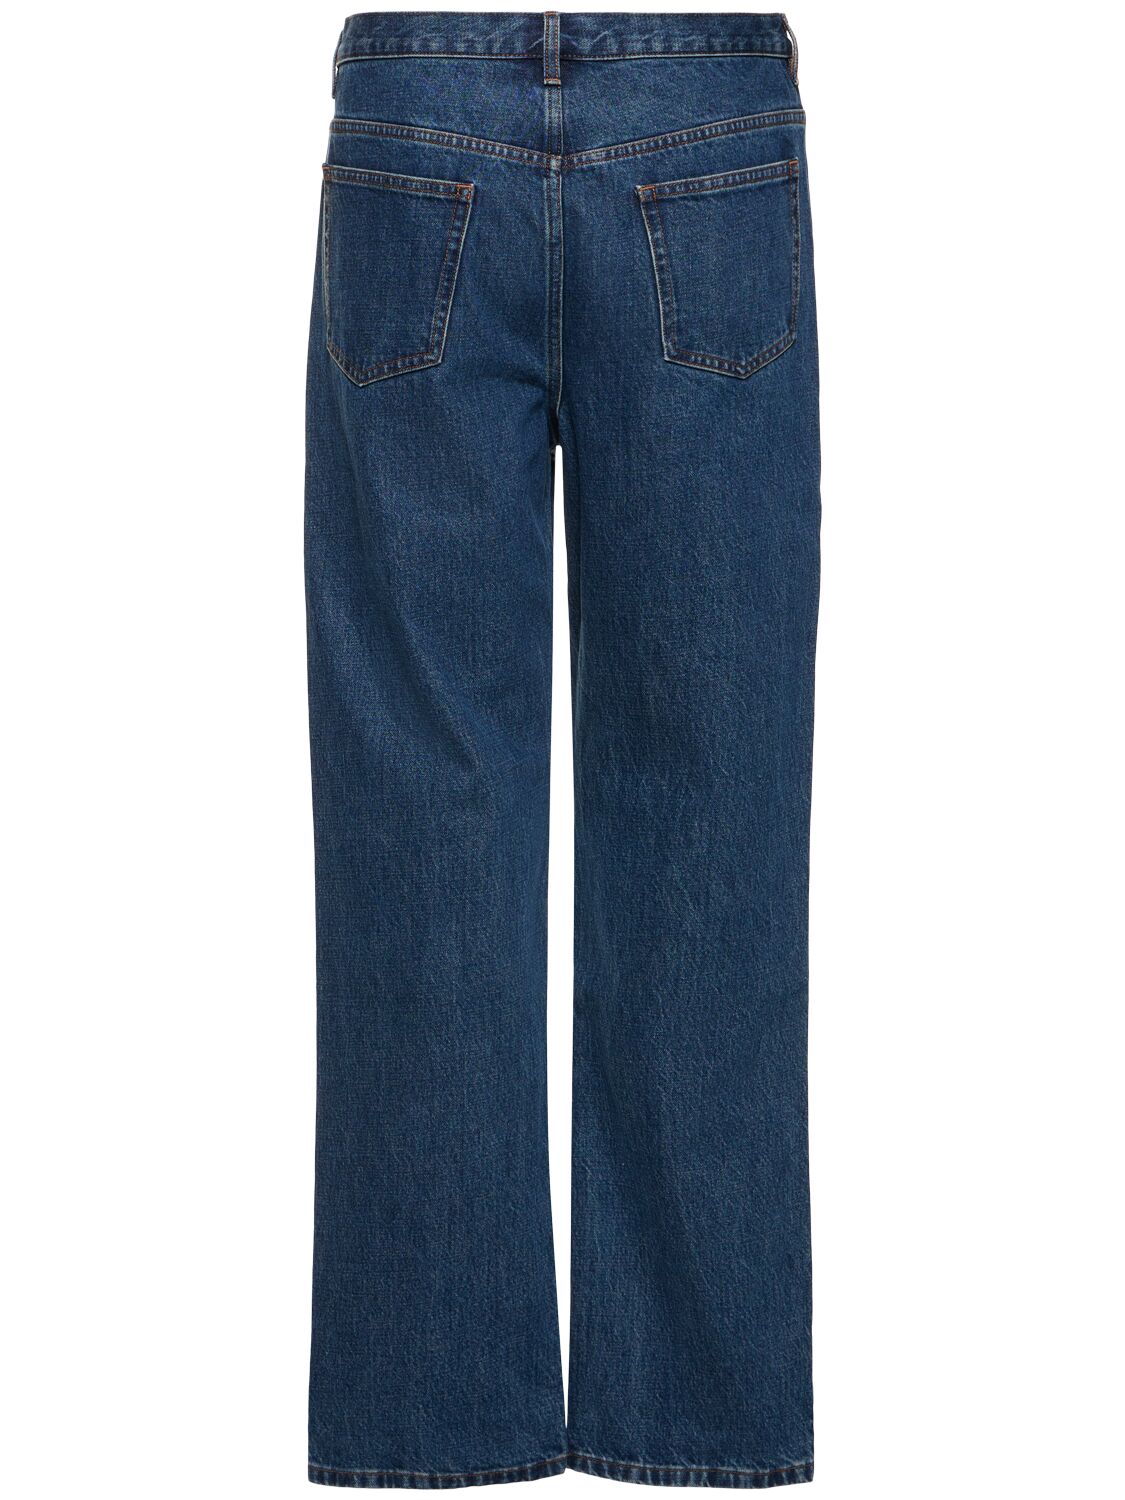 Shop Apc Jean H Relaxed Cotton Denim Jeans In 인디고